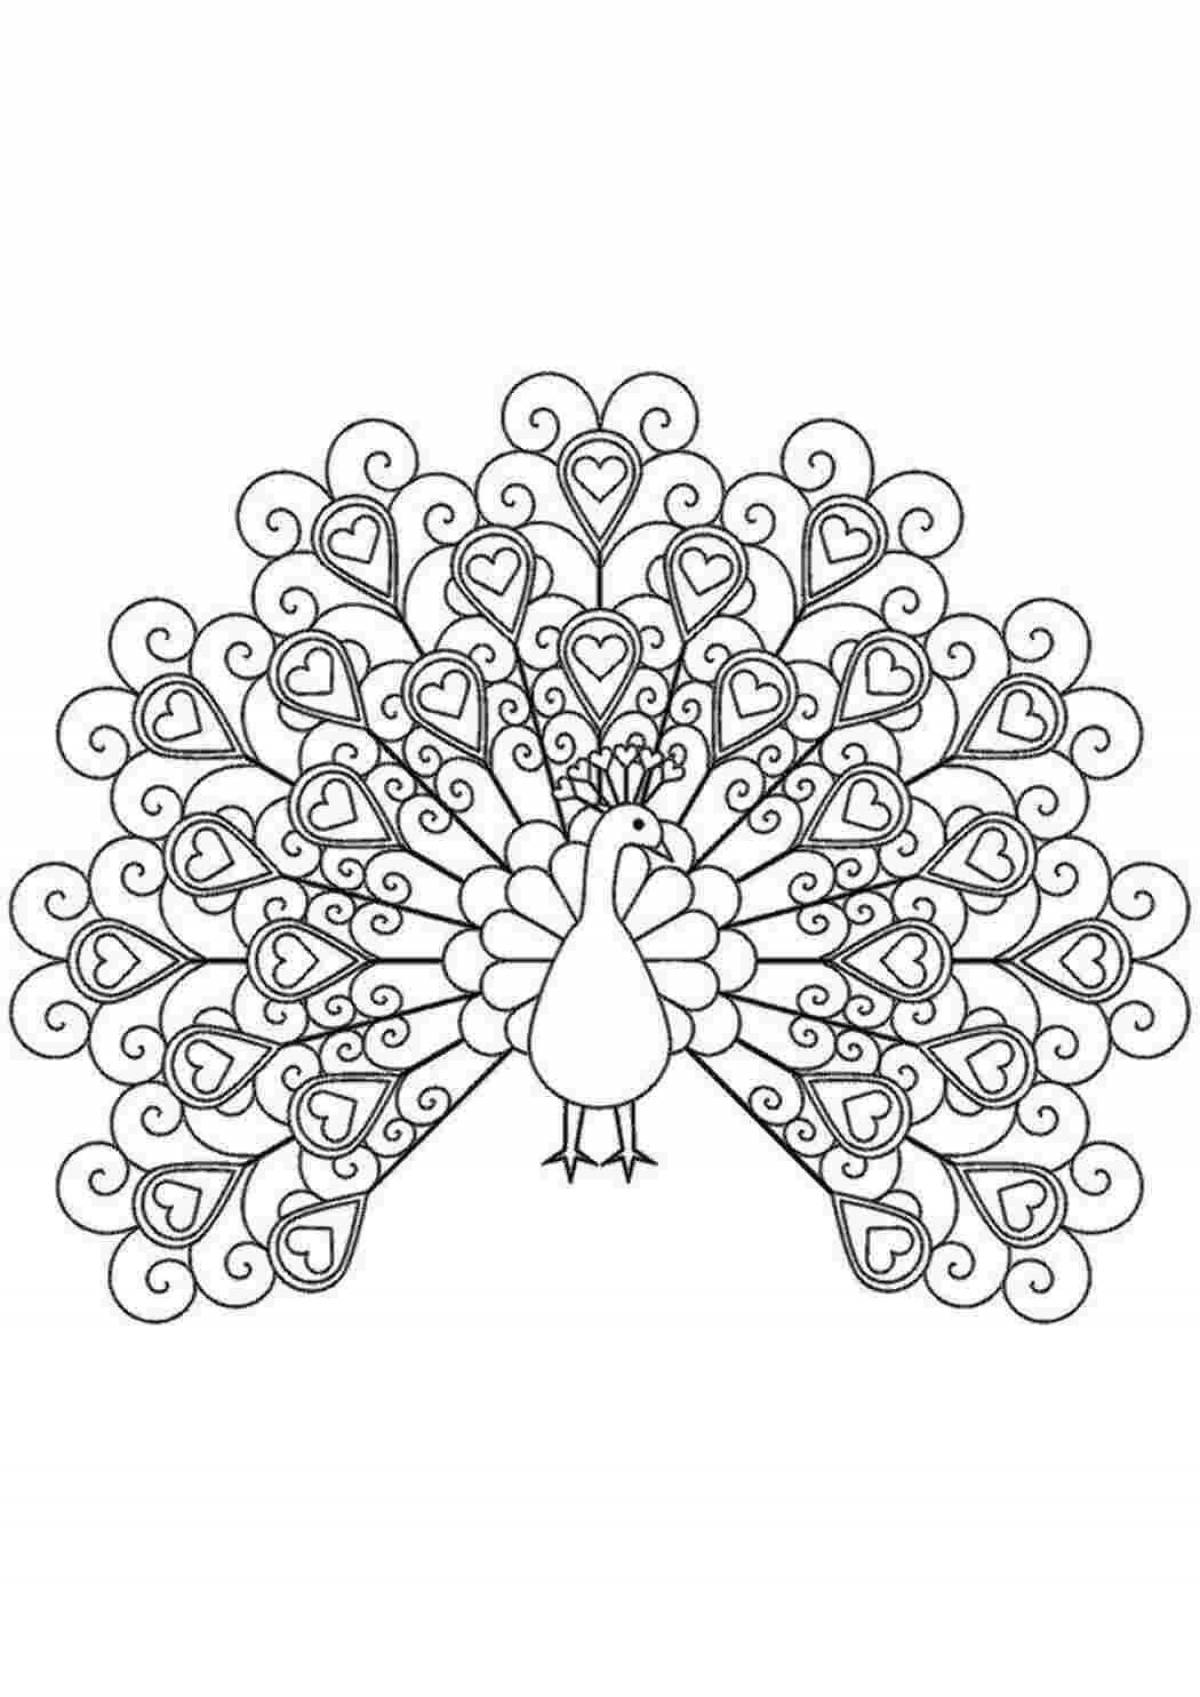 Royal peacock coloring by numbers